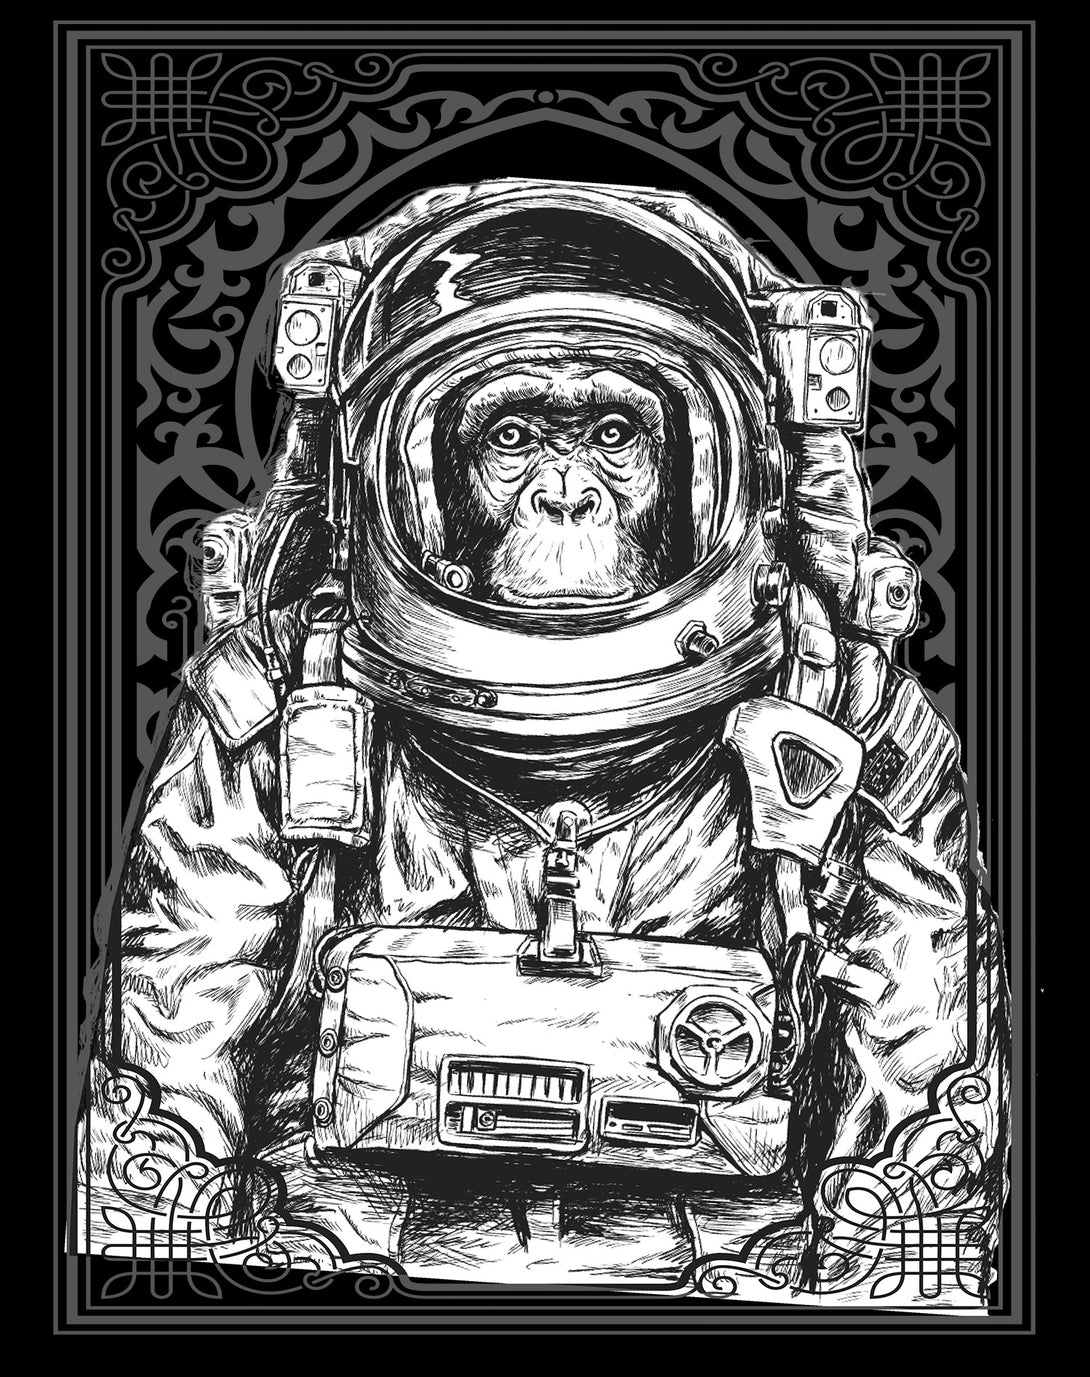 Science Space Monkey Astronaut Launch Nerdy Geek Chic Ironic Official Youth T-shirt Black - Urban Species Design Close Up